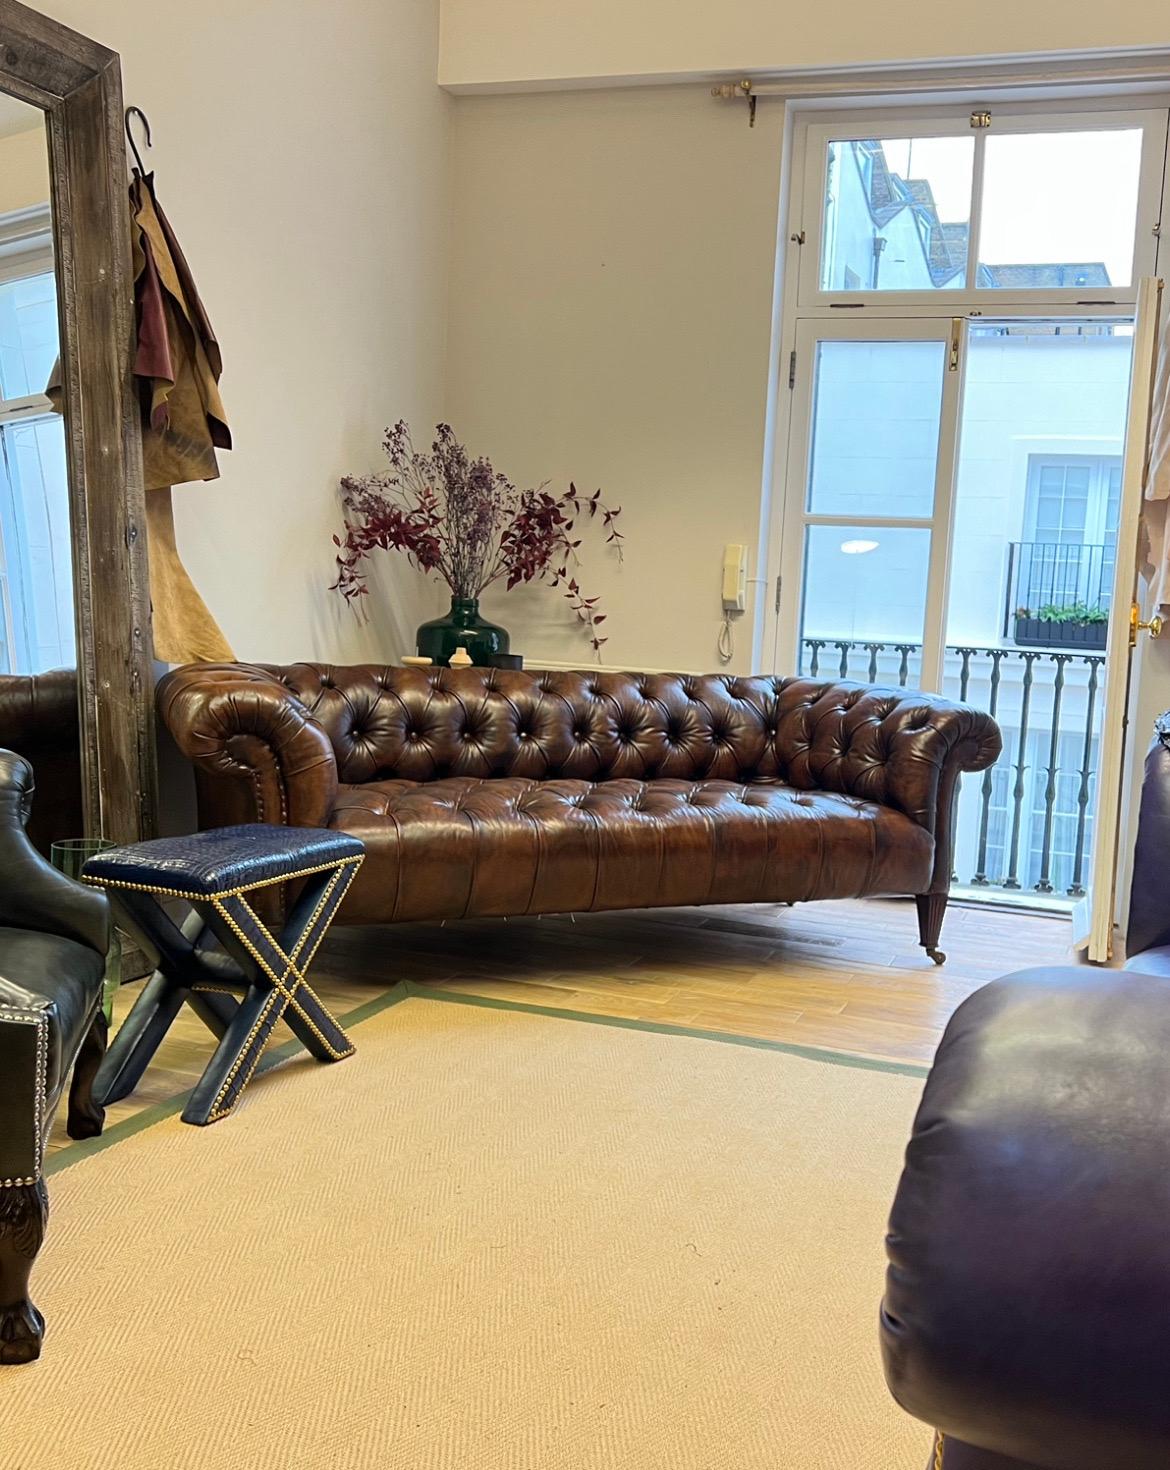 As a furniture maker and LAPADA dealer, I always have a large stock of Chesterfield sofas and chairs ranging from early 19thC through to present day including a selection of our own Signature Collection.

This particular piece by Hamptons & Sons of